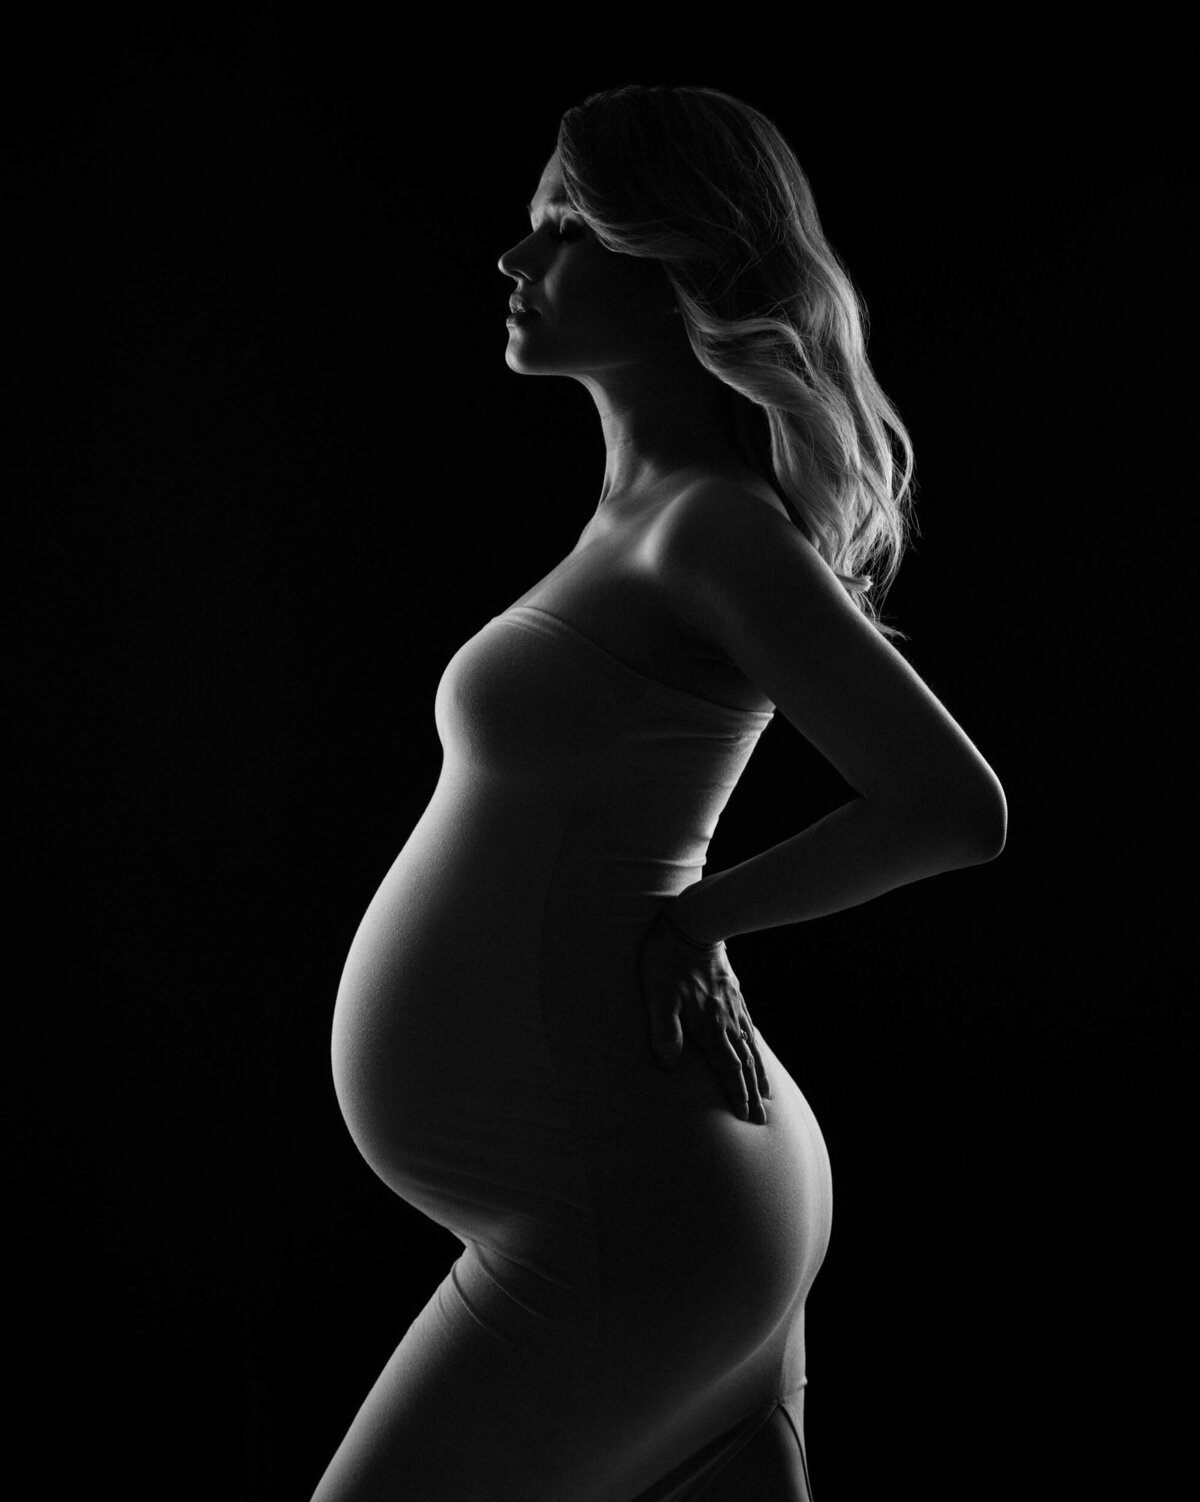 Artistic Lighting for Maternity Photography Course by Lola Melani-9